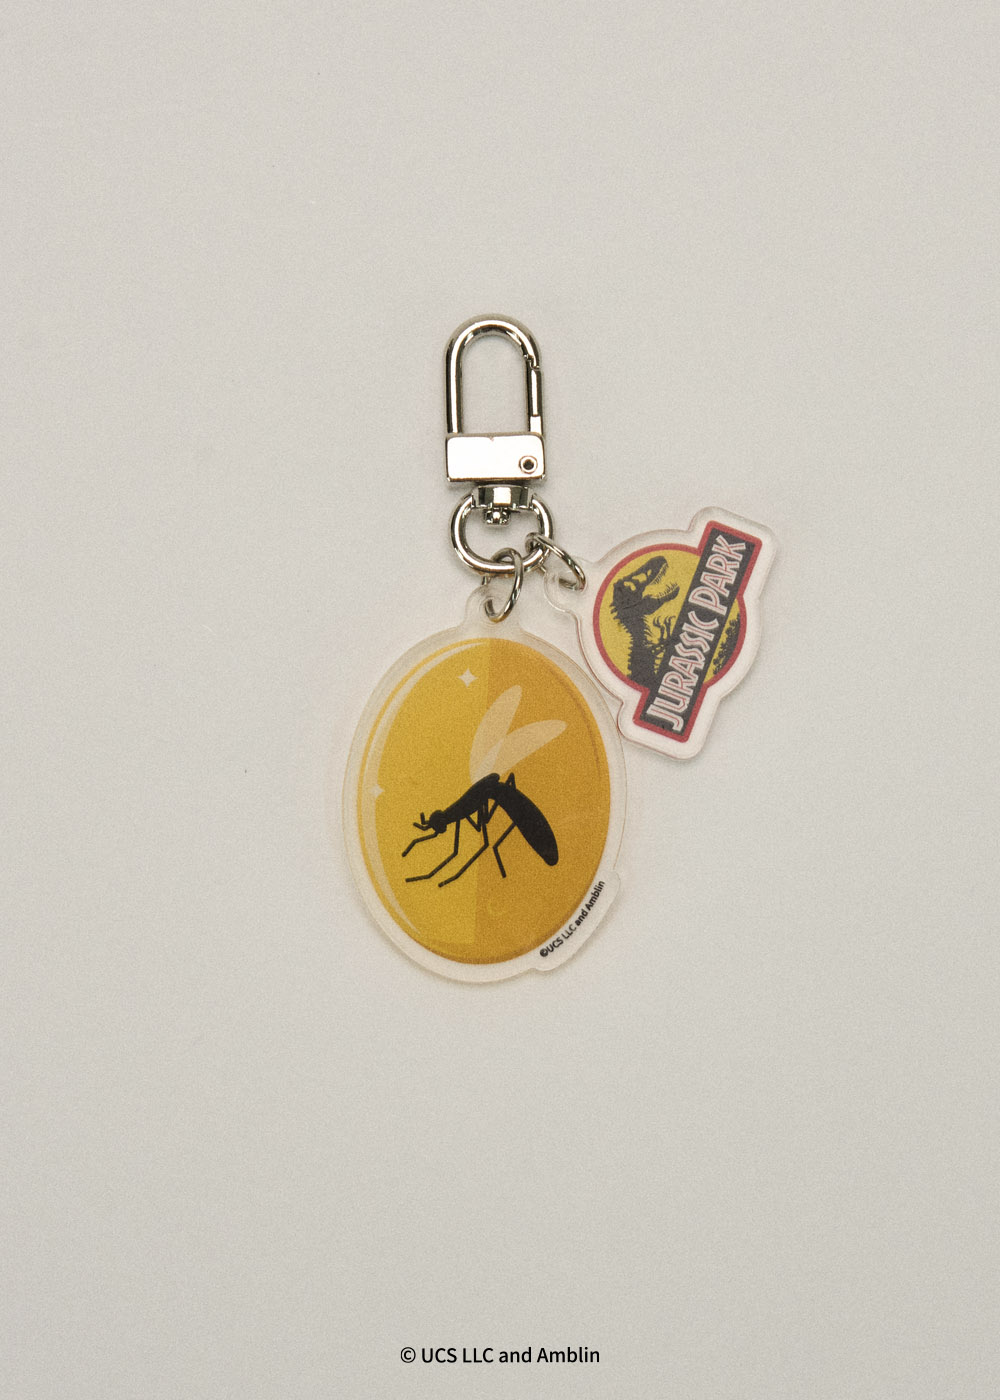 [JURASSIC] KEY RING_MOSQUITO IN AMBER